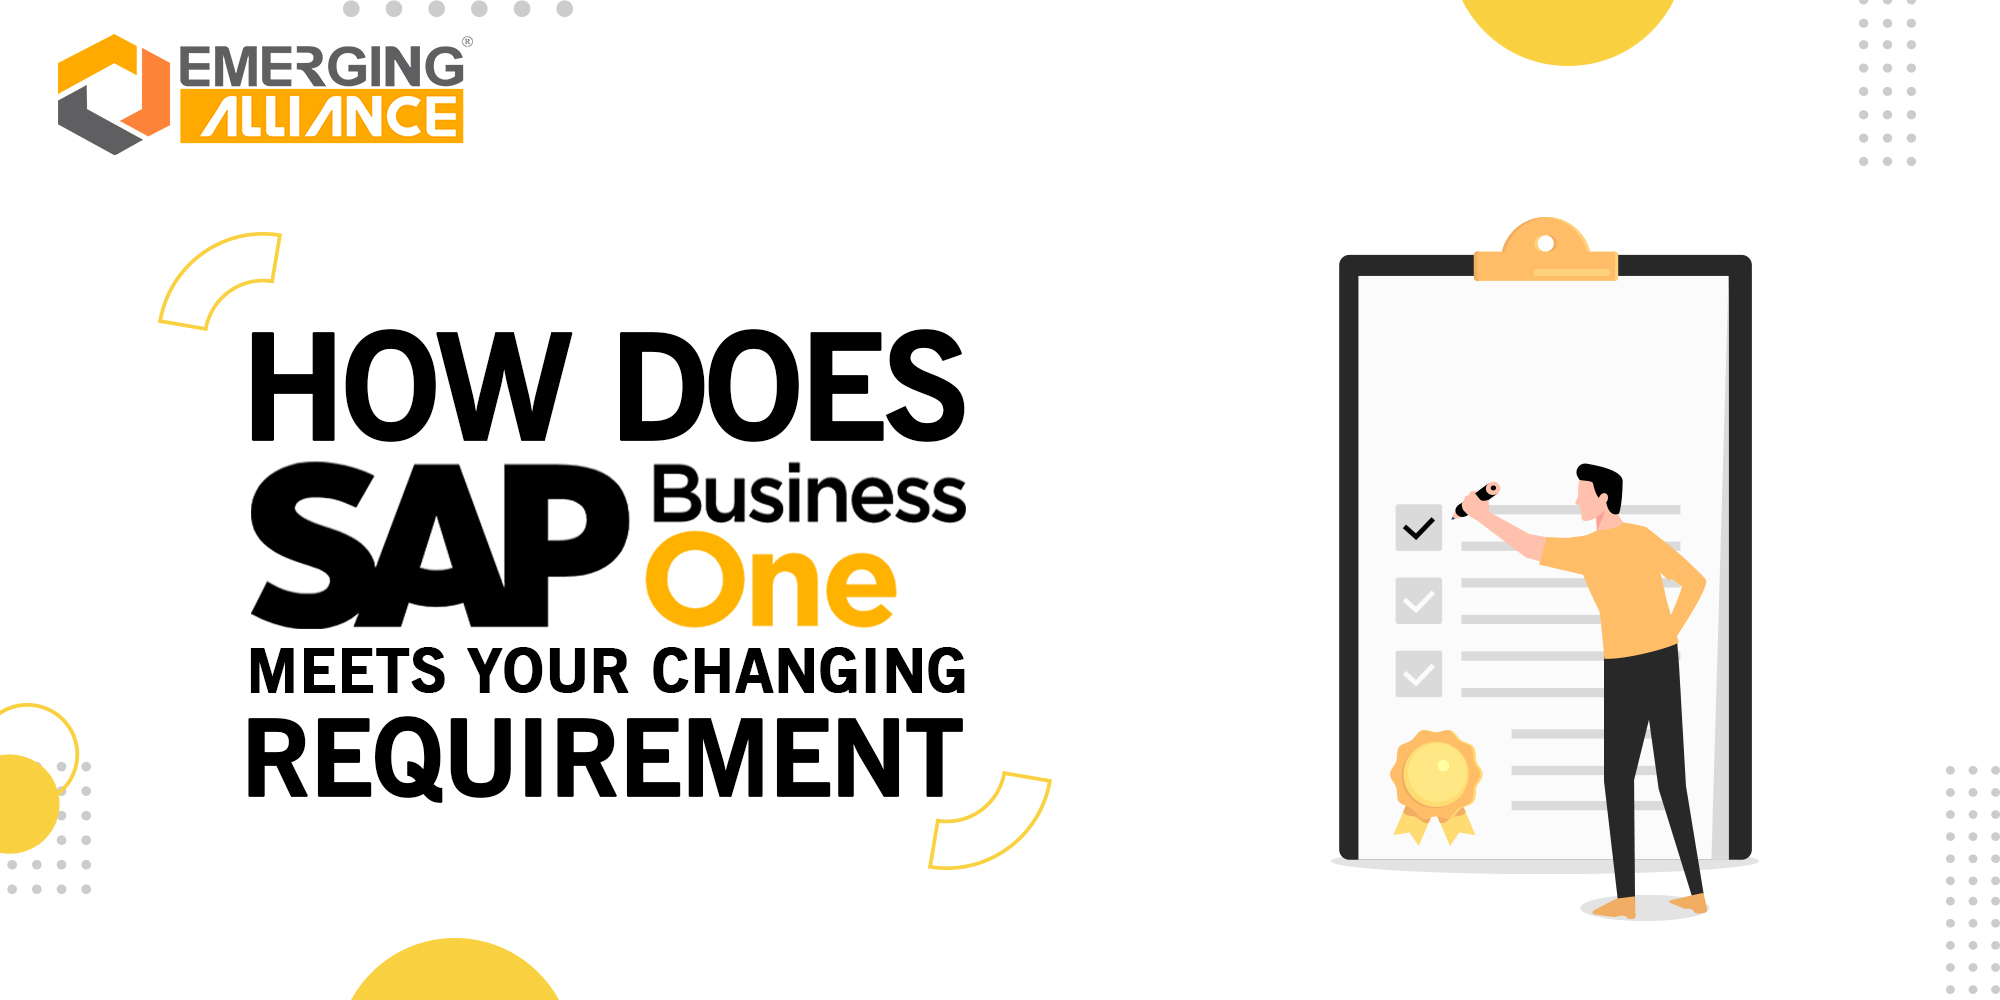 SAP B1 MEETS YOUR CHANGING REQUIREMENTS